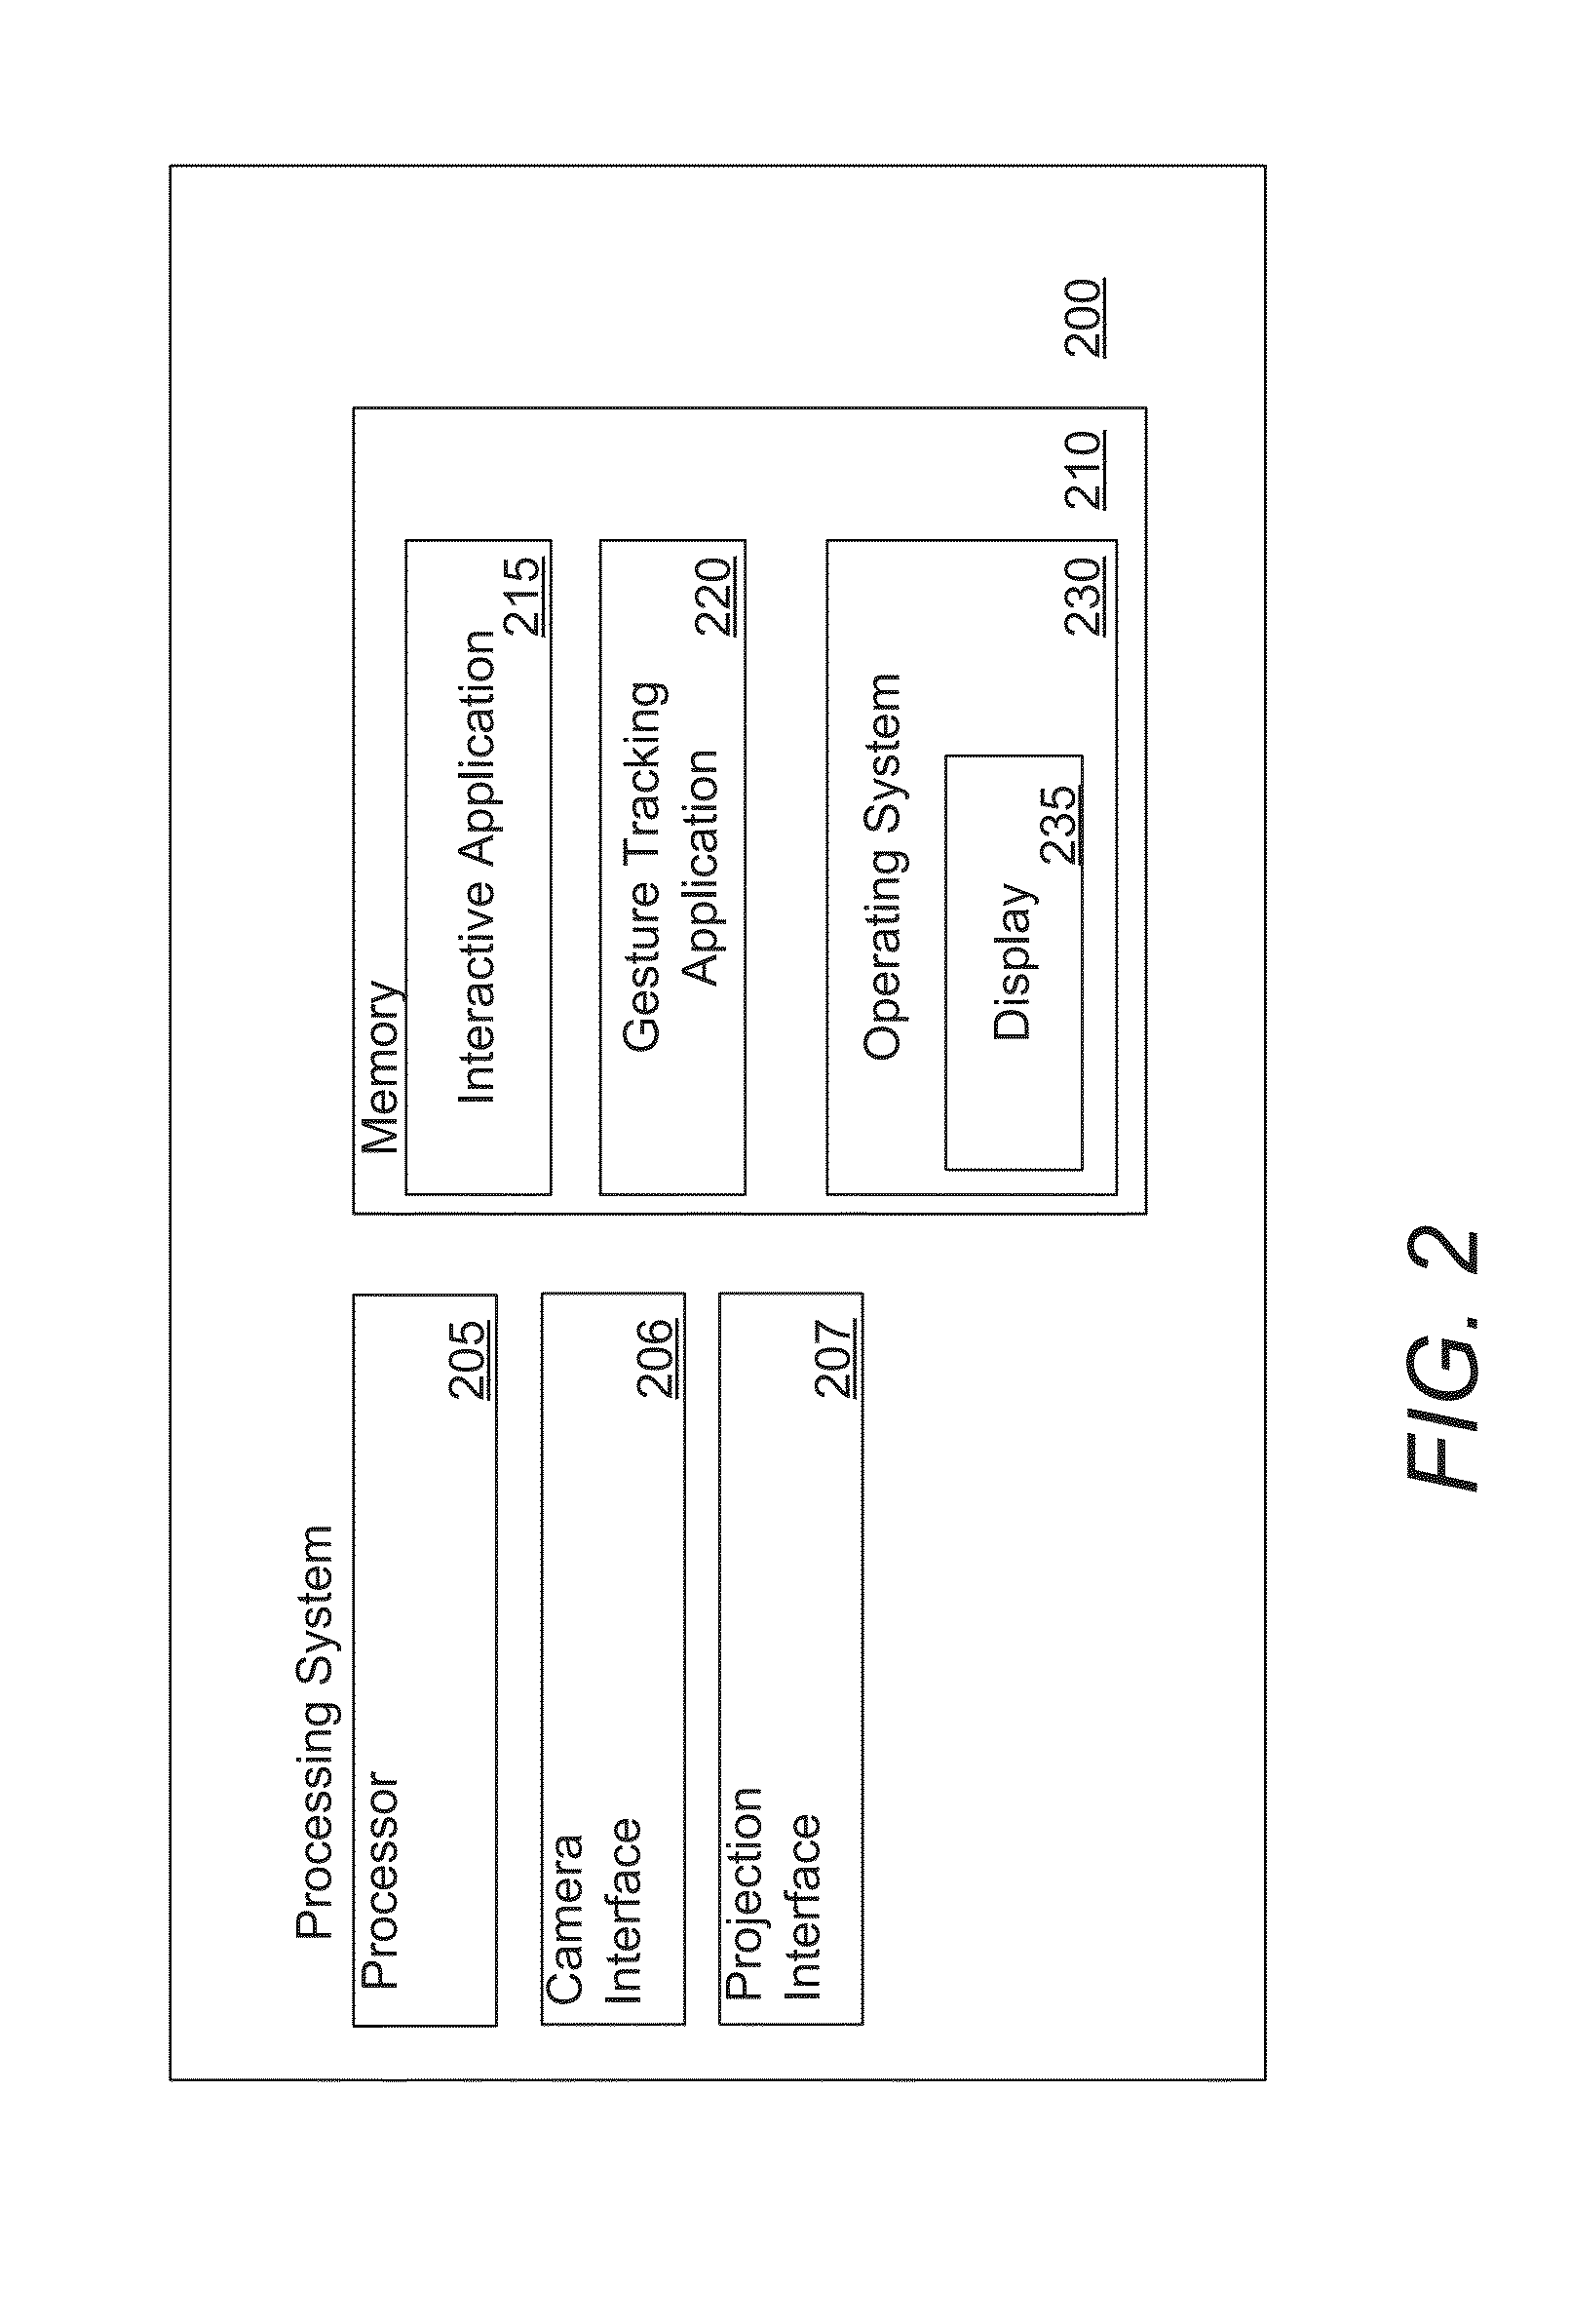 Systems and Methods for Interacting with a Projected User Interface